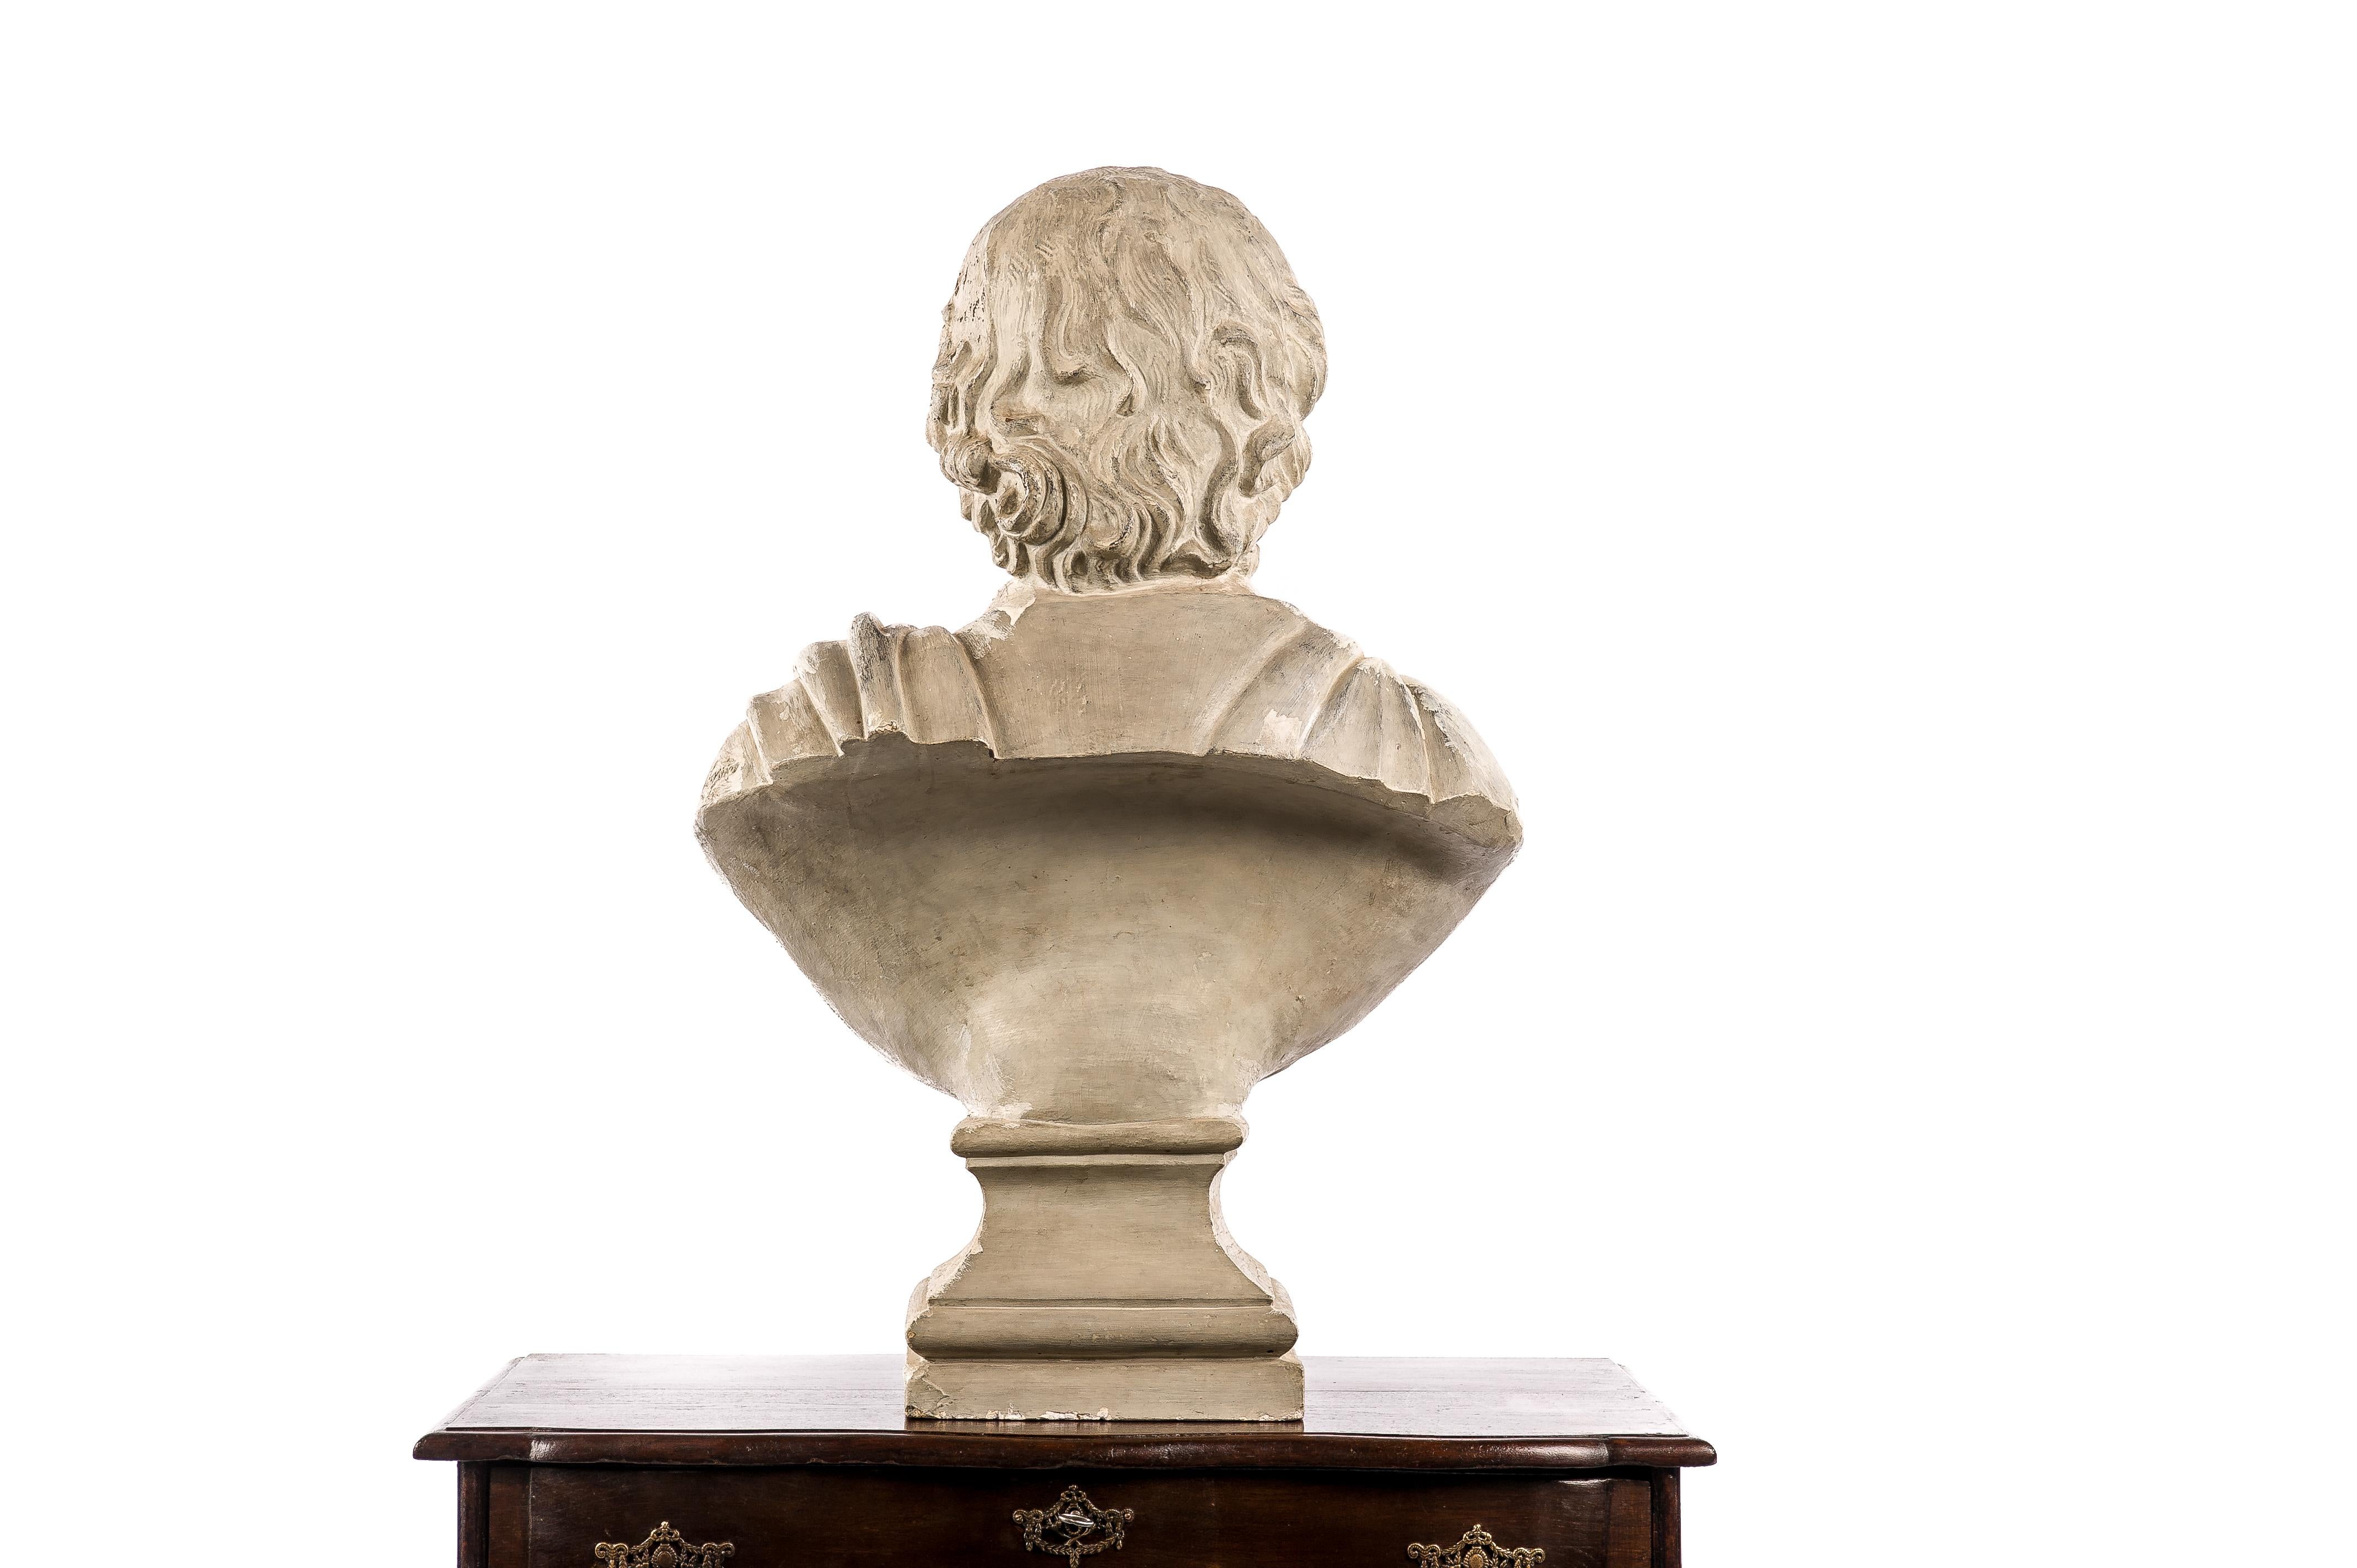 Cast 19th-Century Plaster Bust of the Flemish Baroque Painter Anthony Van Dyck